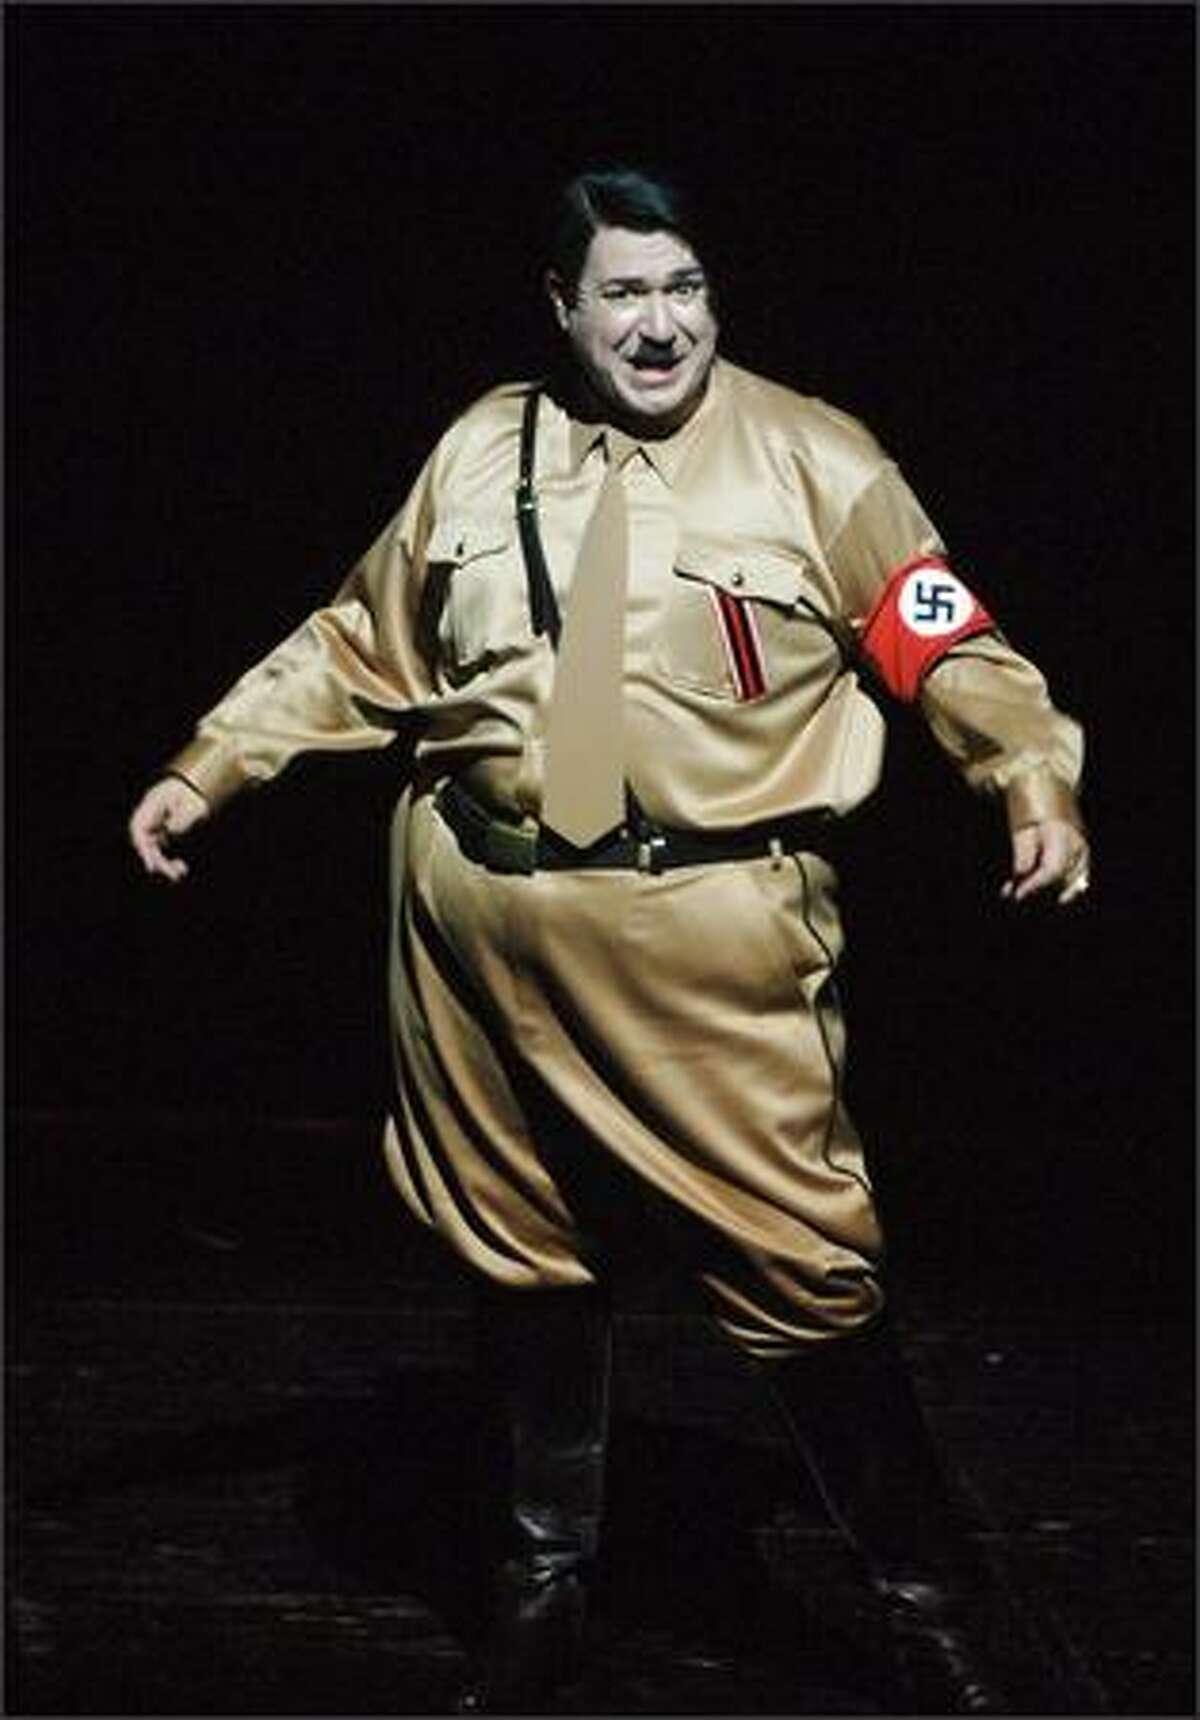 They said it couldn't be done, but they wuz wrong. A clownish Adolph Hitler (played by Itzik Cohen) hams it up in a production of "The Producers" that has been playing to packed houses at the Kameri Theatre in Tel Aviv, Israel. And this Adolph even speaks, believe it or not, Hebrew!